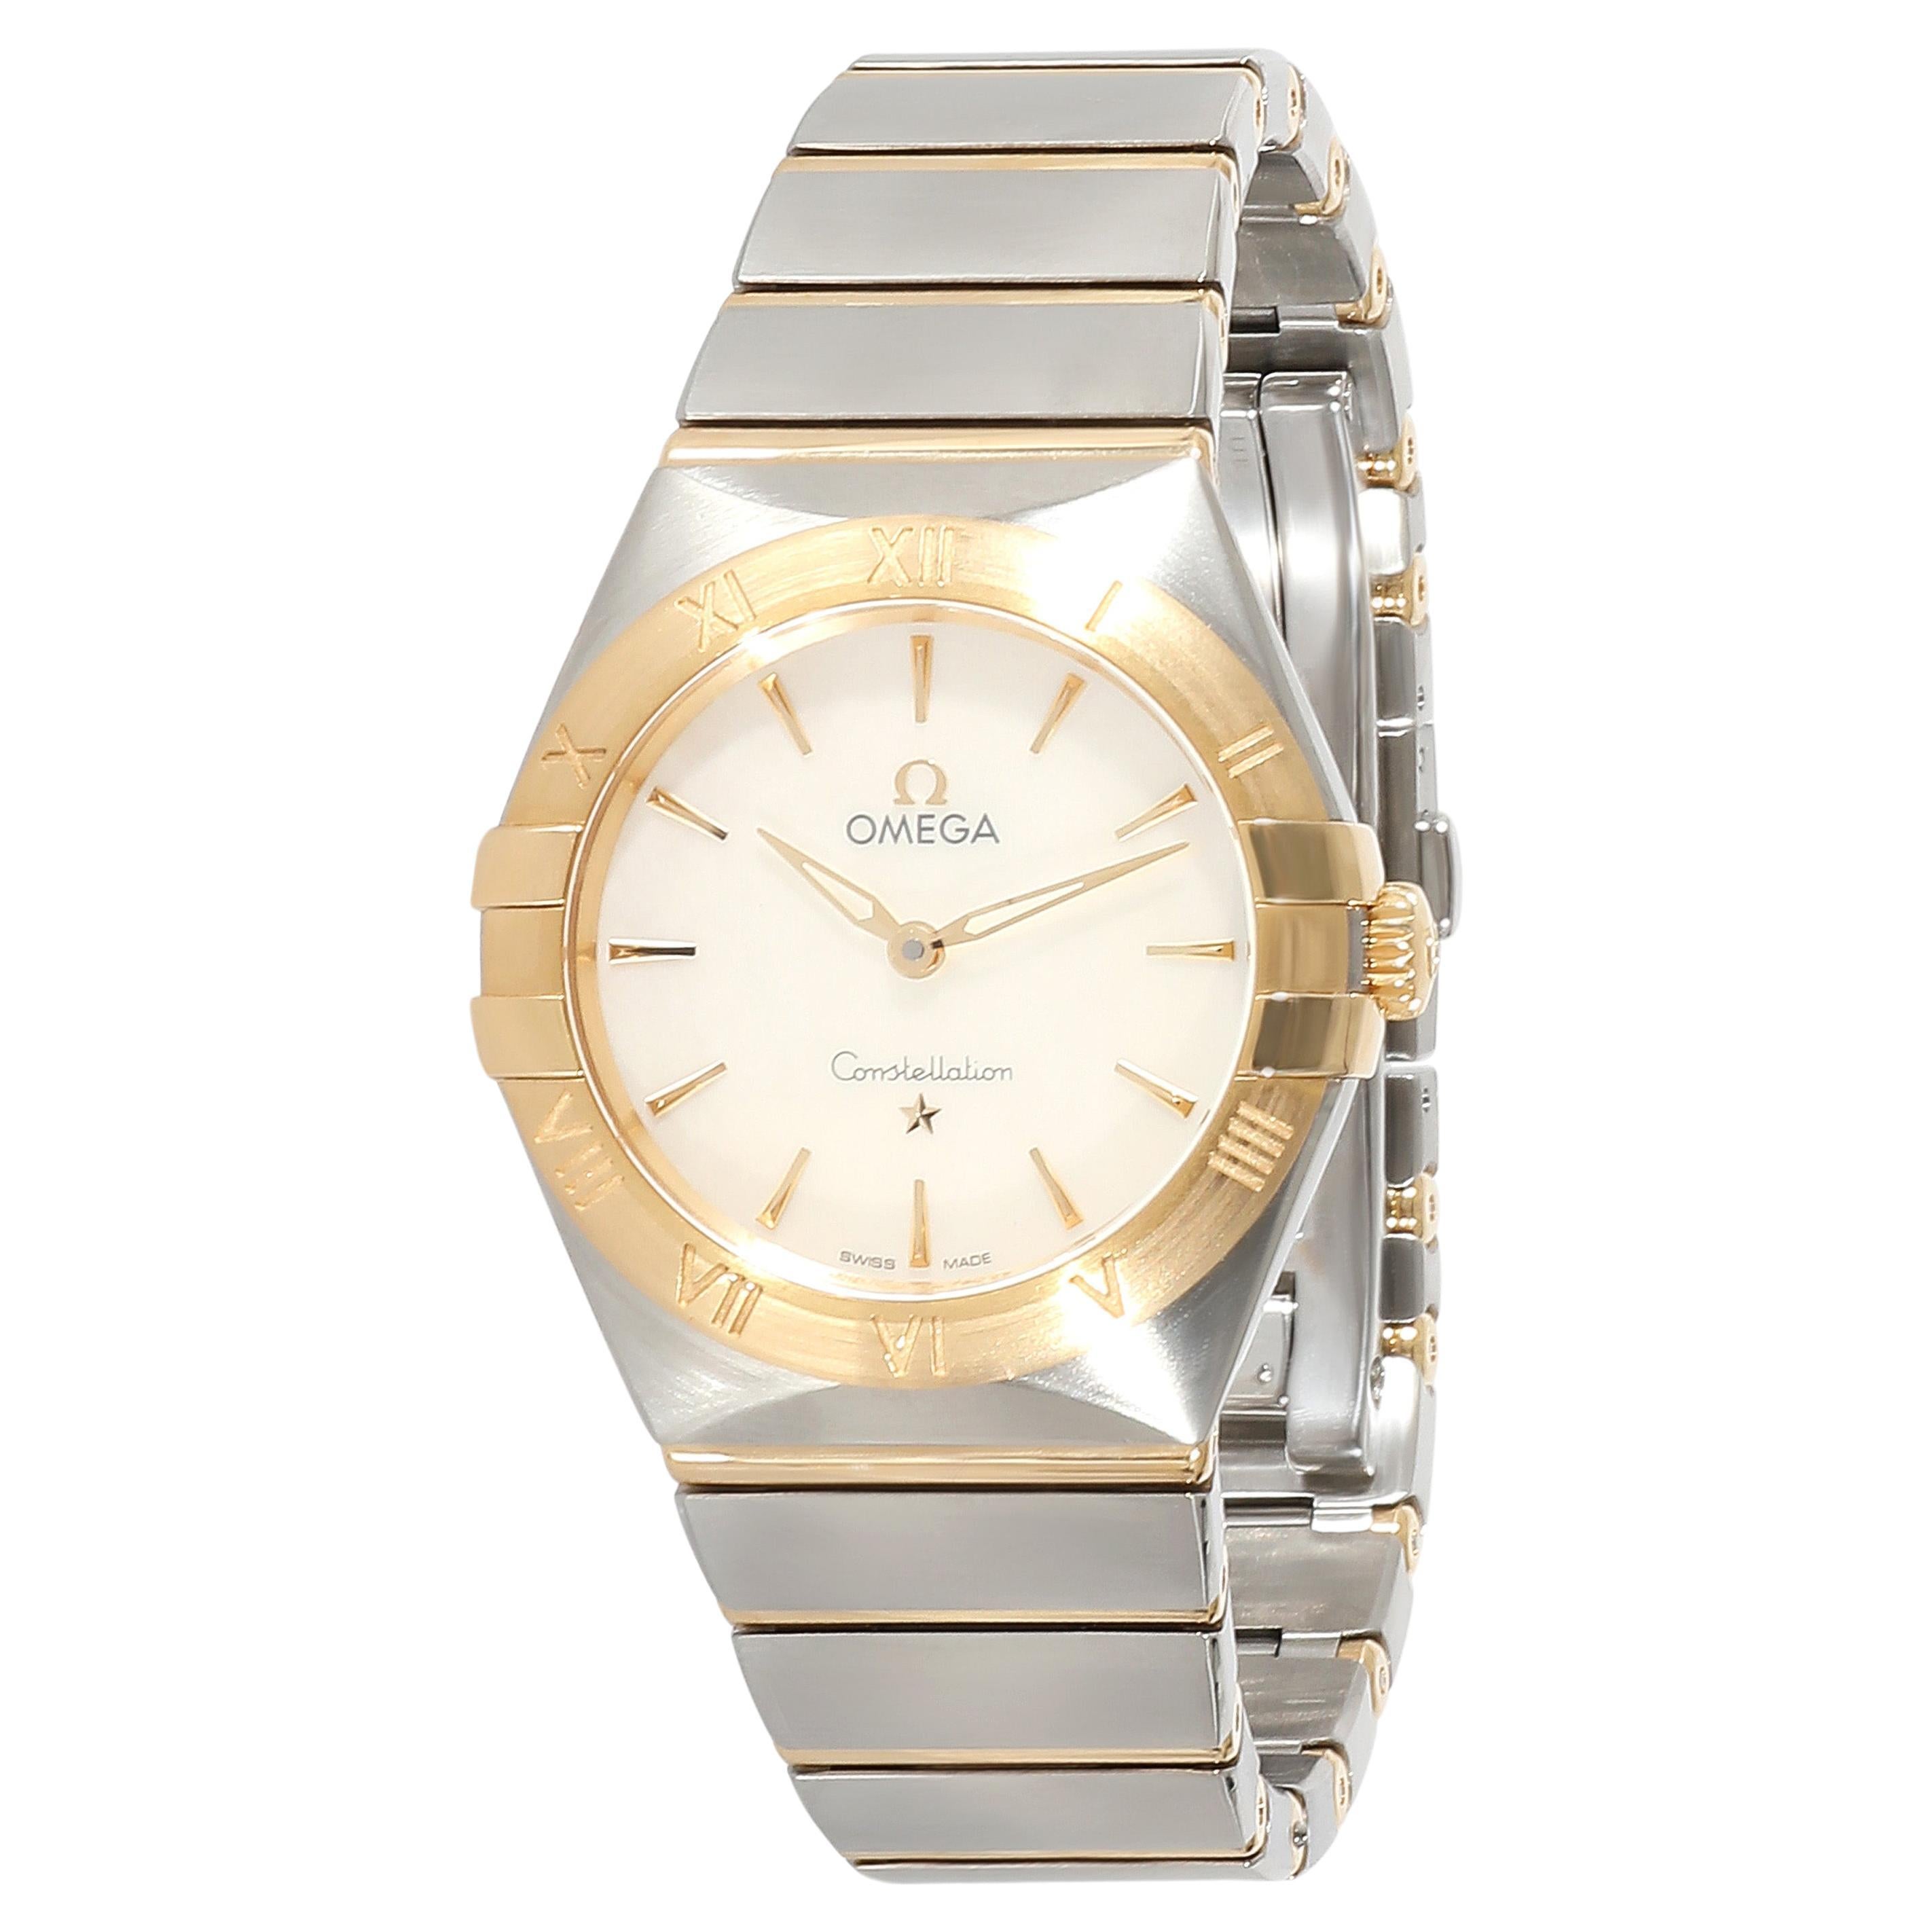 Omega Constellation 131.20.28.60.05.002 Women's Watch in 18k Stainless Steel/Yel For Sale